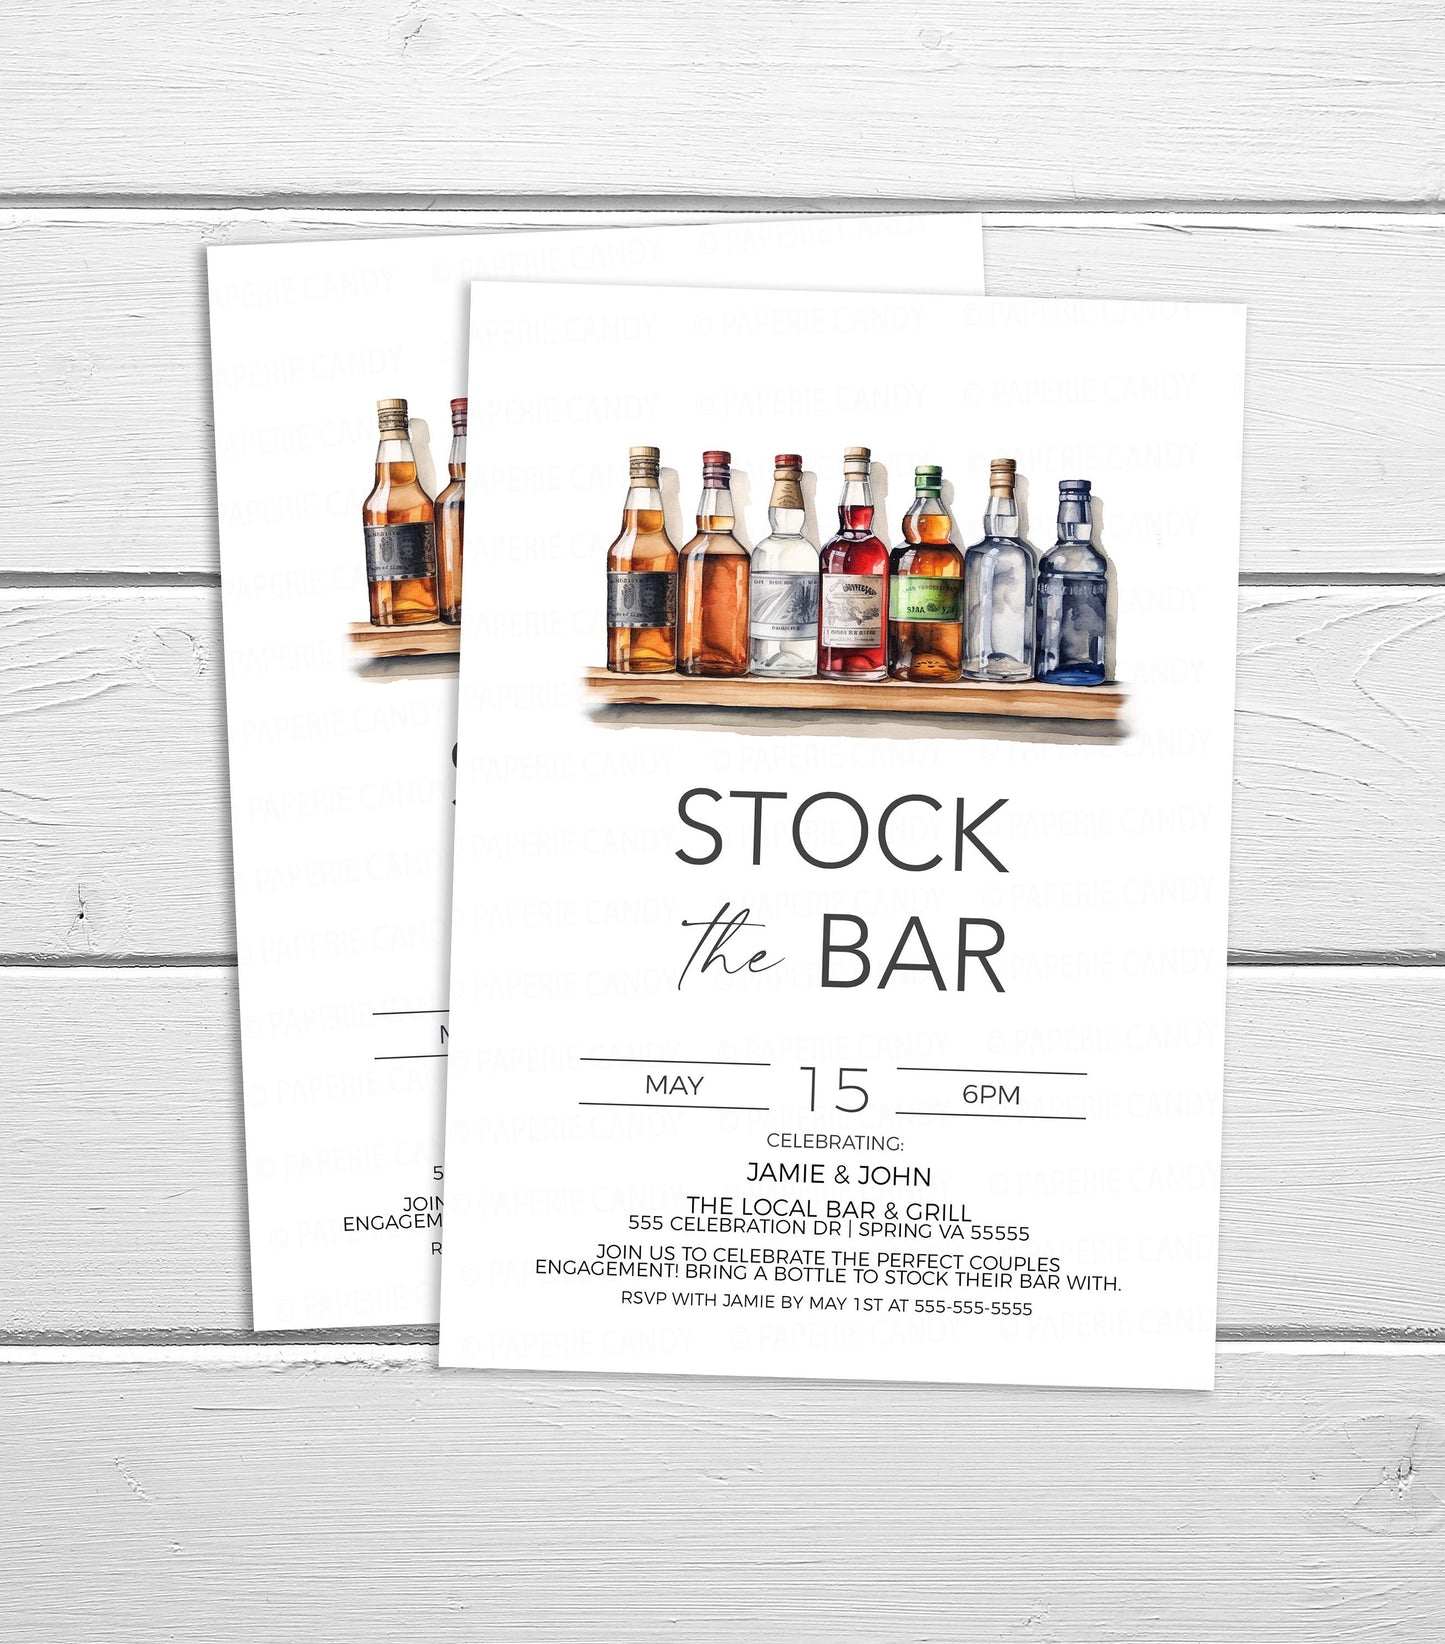 Stock The Bar Couples Shower Invitation, Stock Their Bar Invite, Coed Engagement Party, His Hers Couples Shower, Editable Printable Template